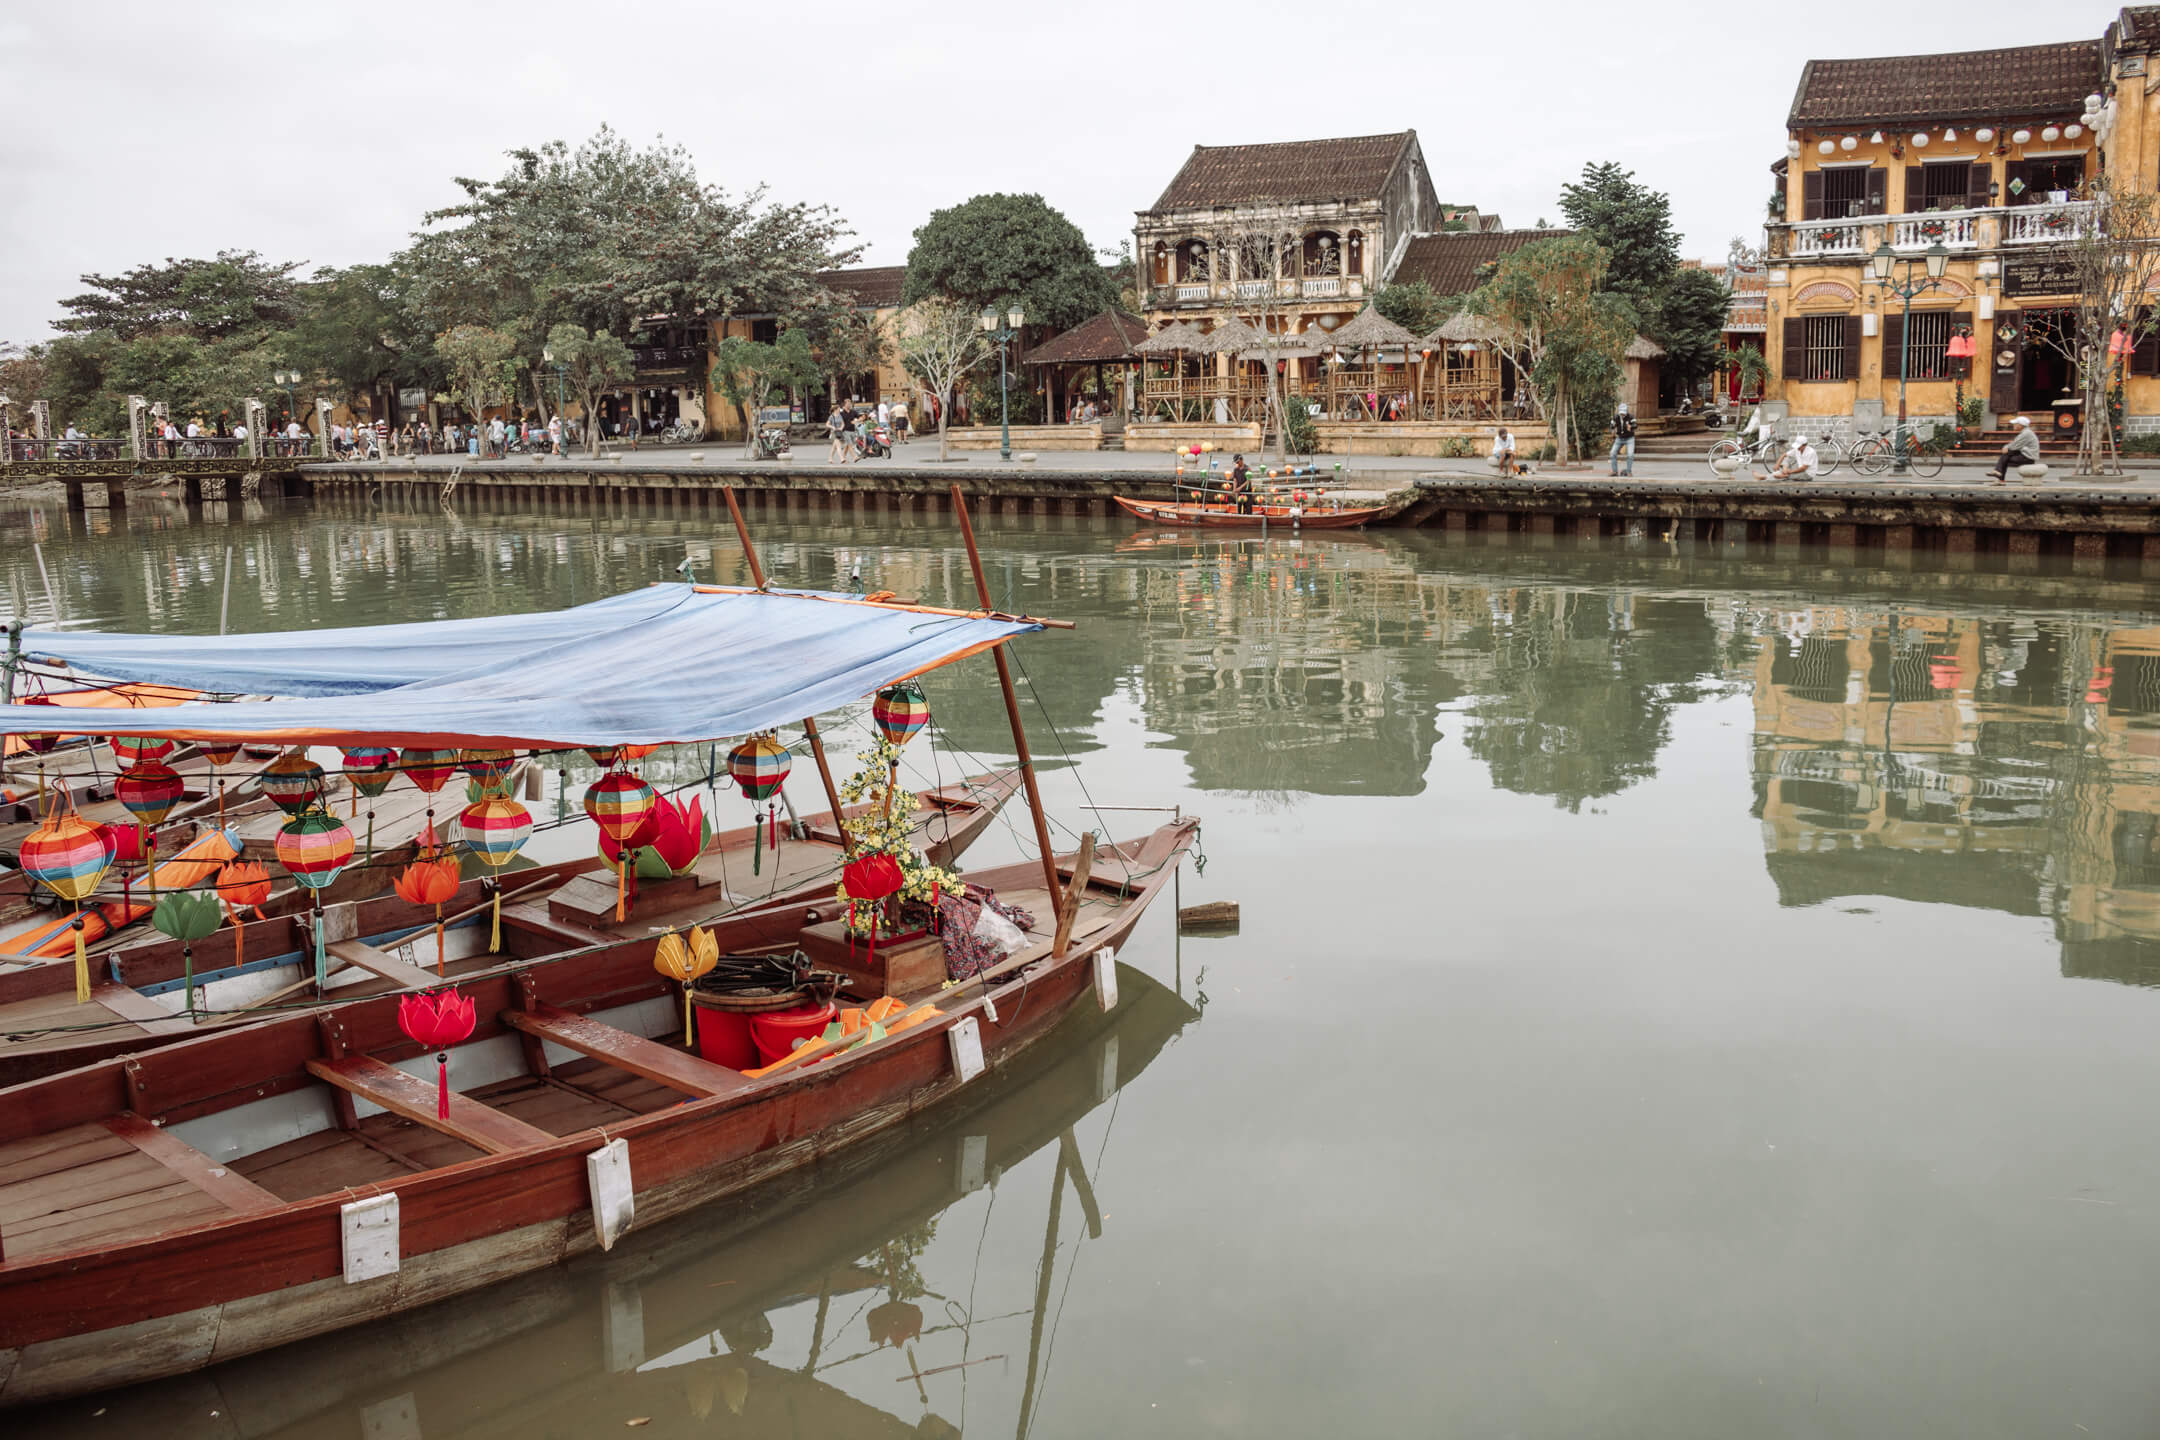 The Top Things To See In Hoi An (The Best Hoi An Tourist Attractions)